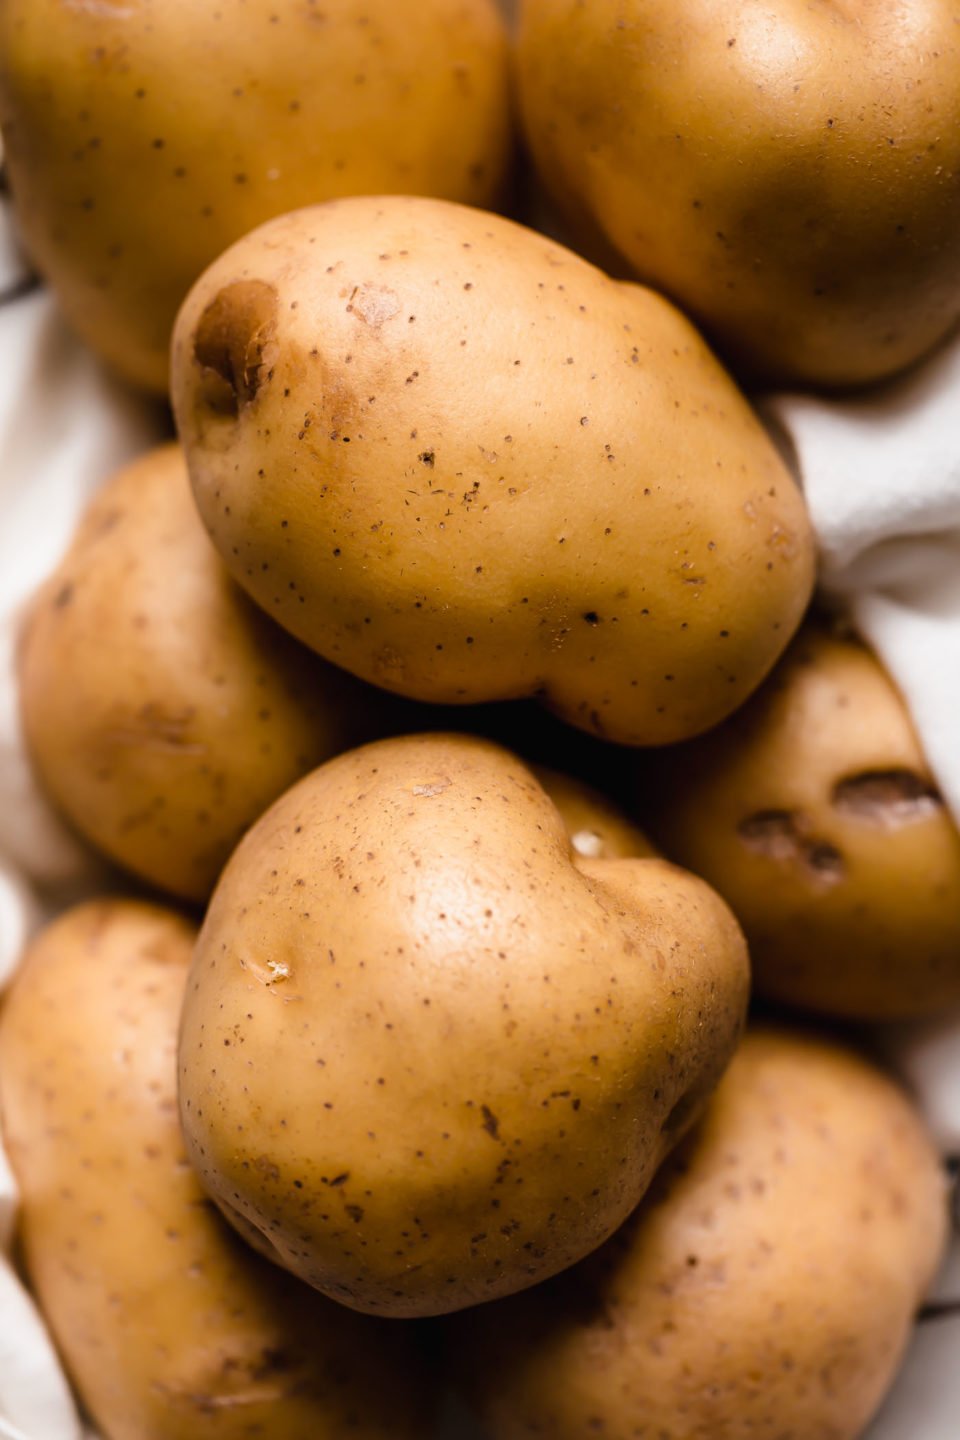 A pile of Yukon Gold potatoes for the best buttermilk mashed potatoes.